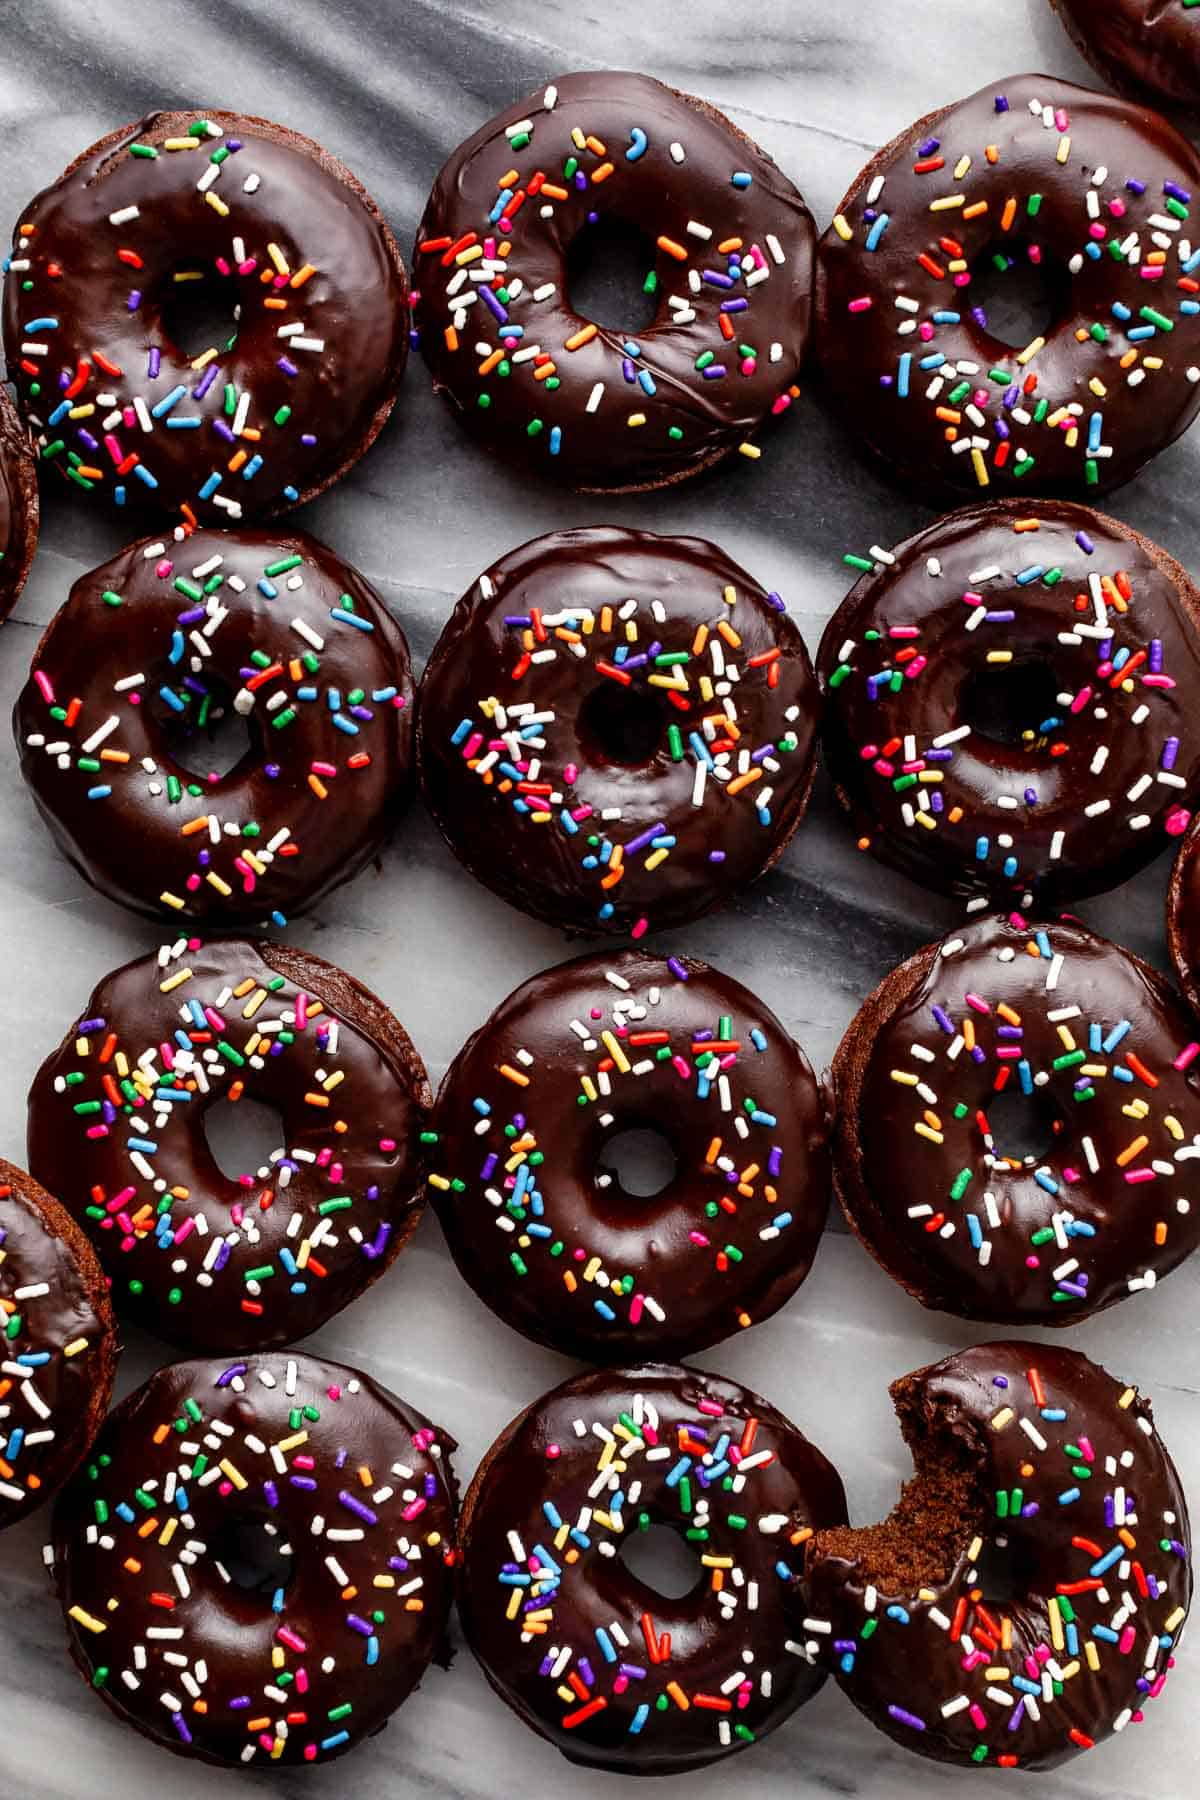 chocolate donuts with sprinkles.